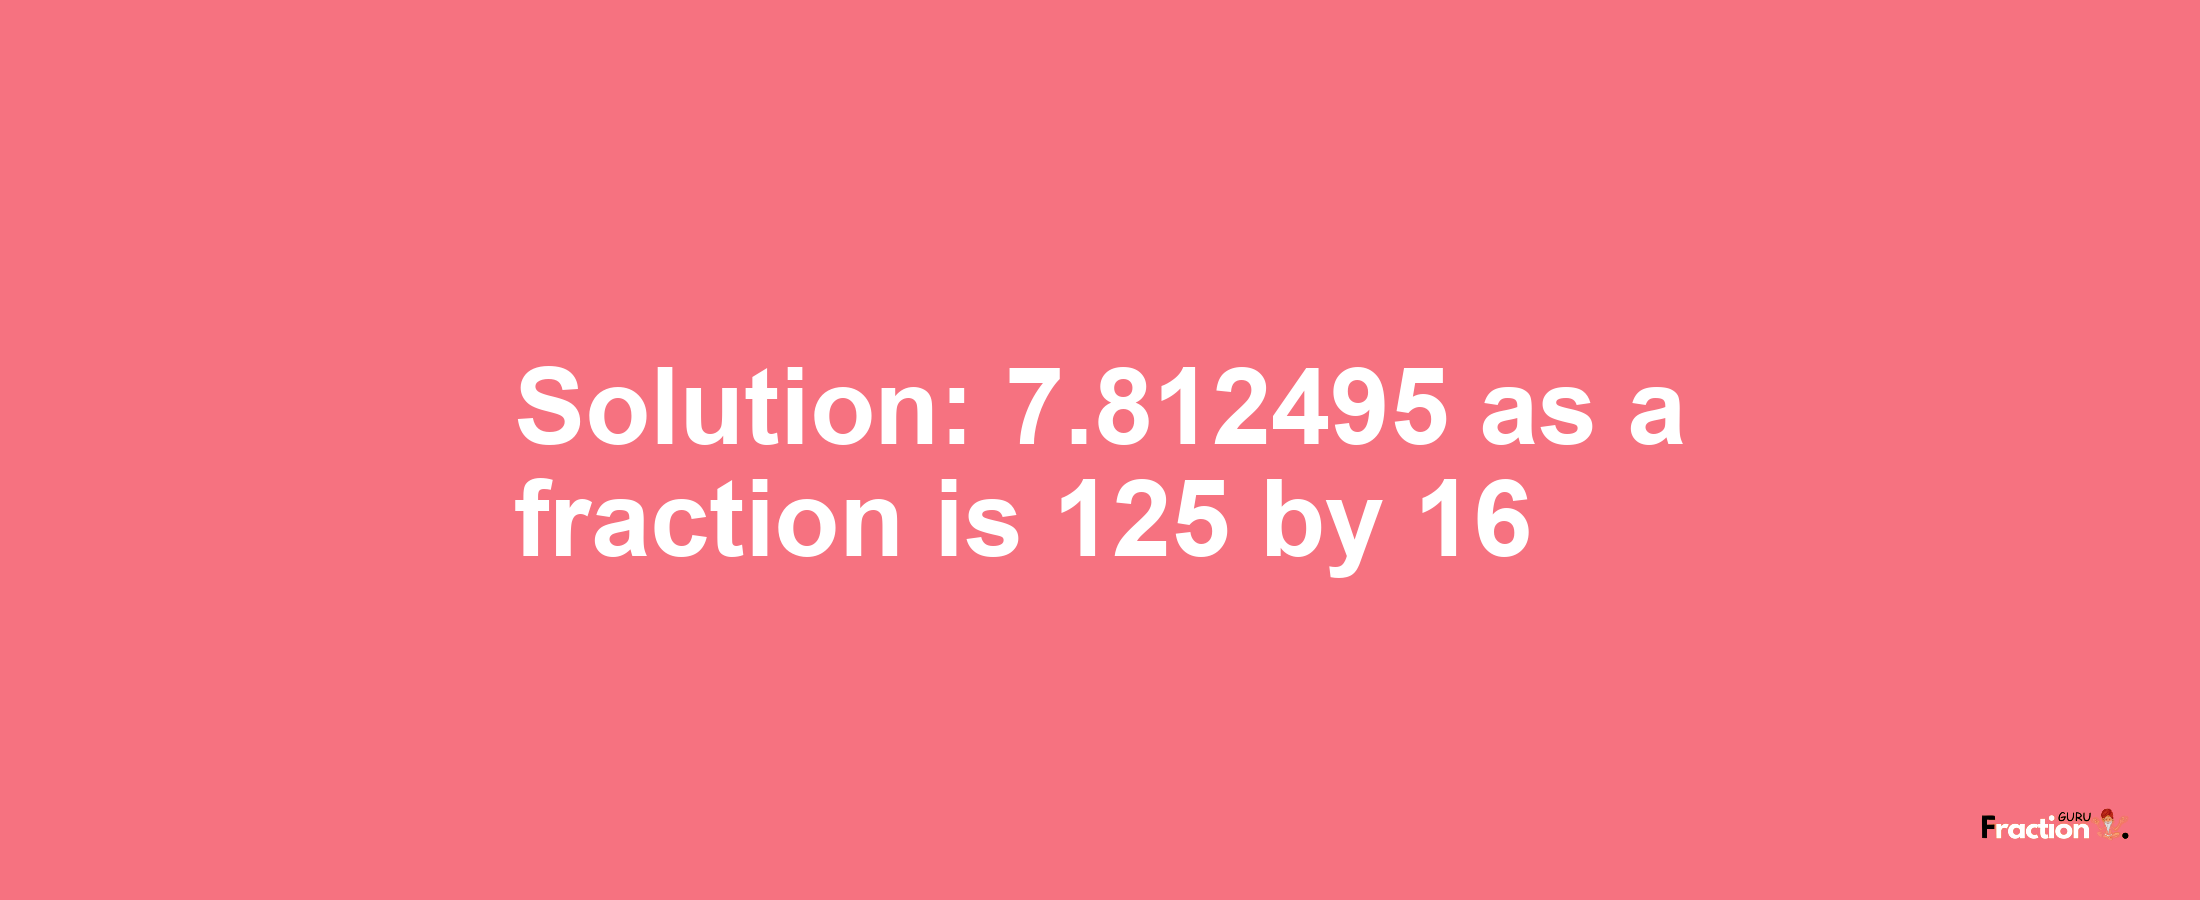 Solution:7.812495 as a fraction is 125/16